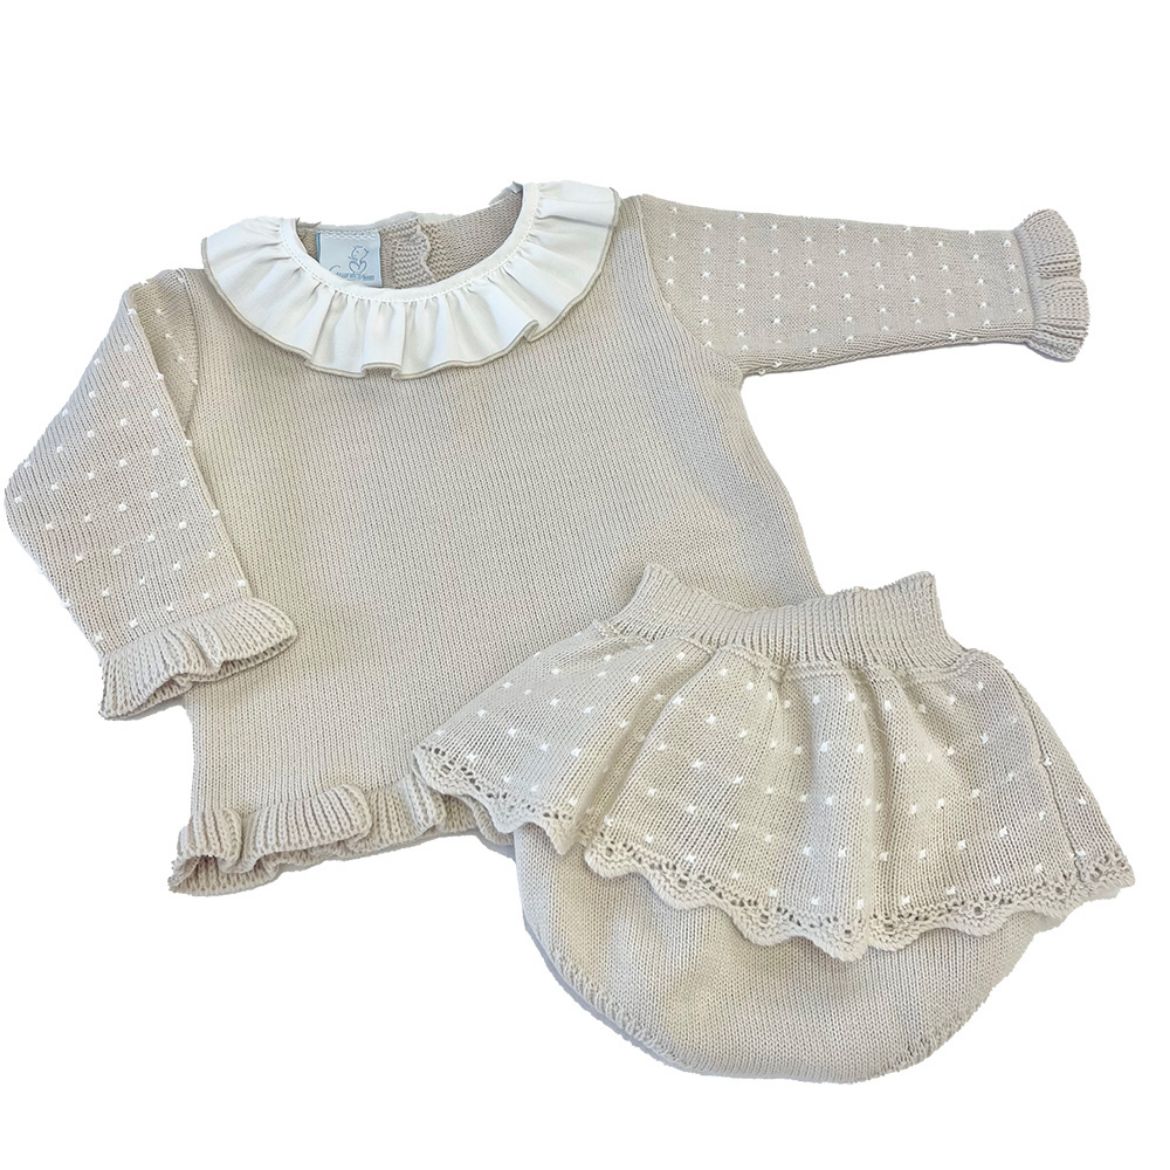 Picture of Granlei Girls Knitted Beige Spotted Set